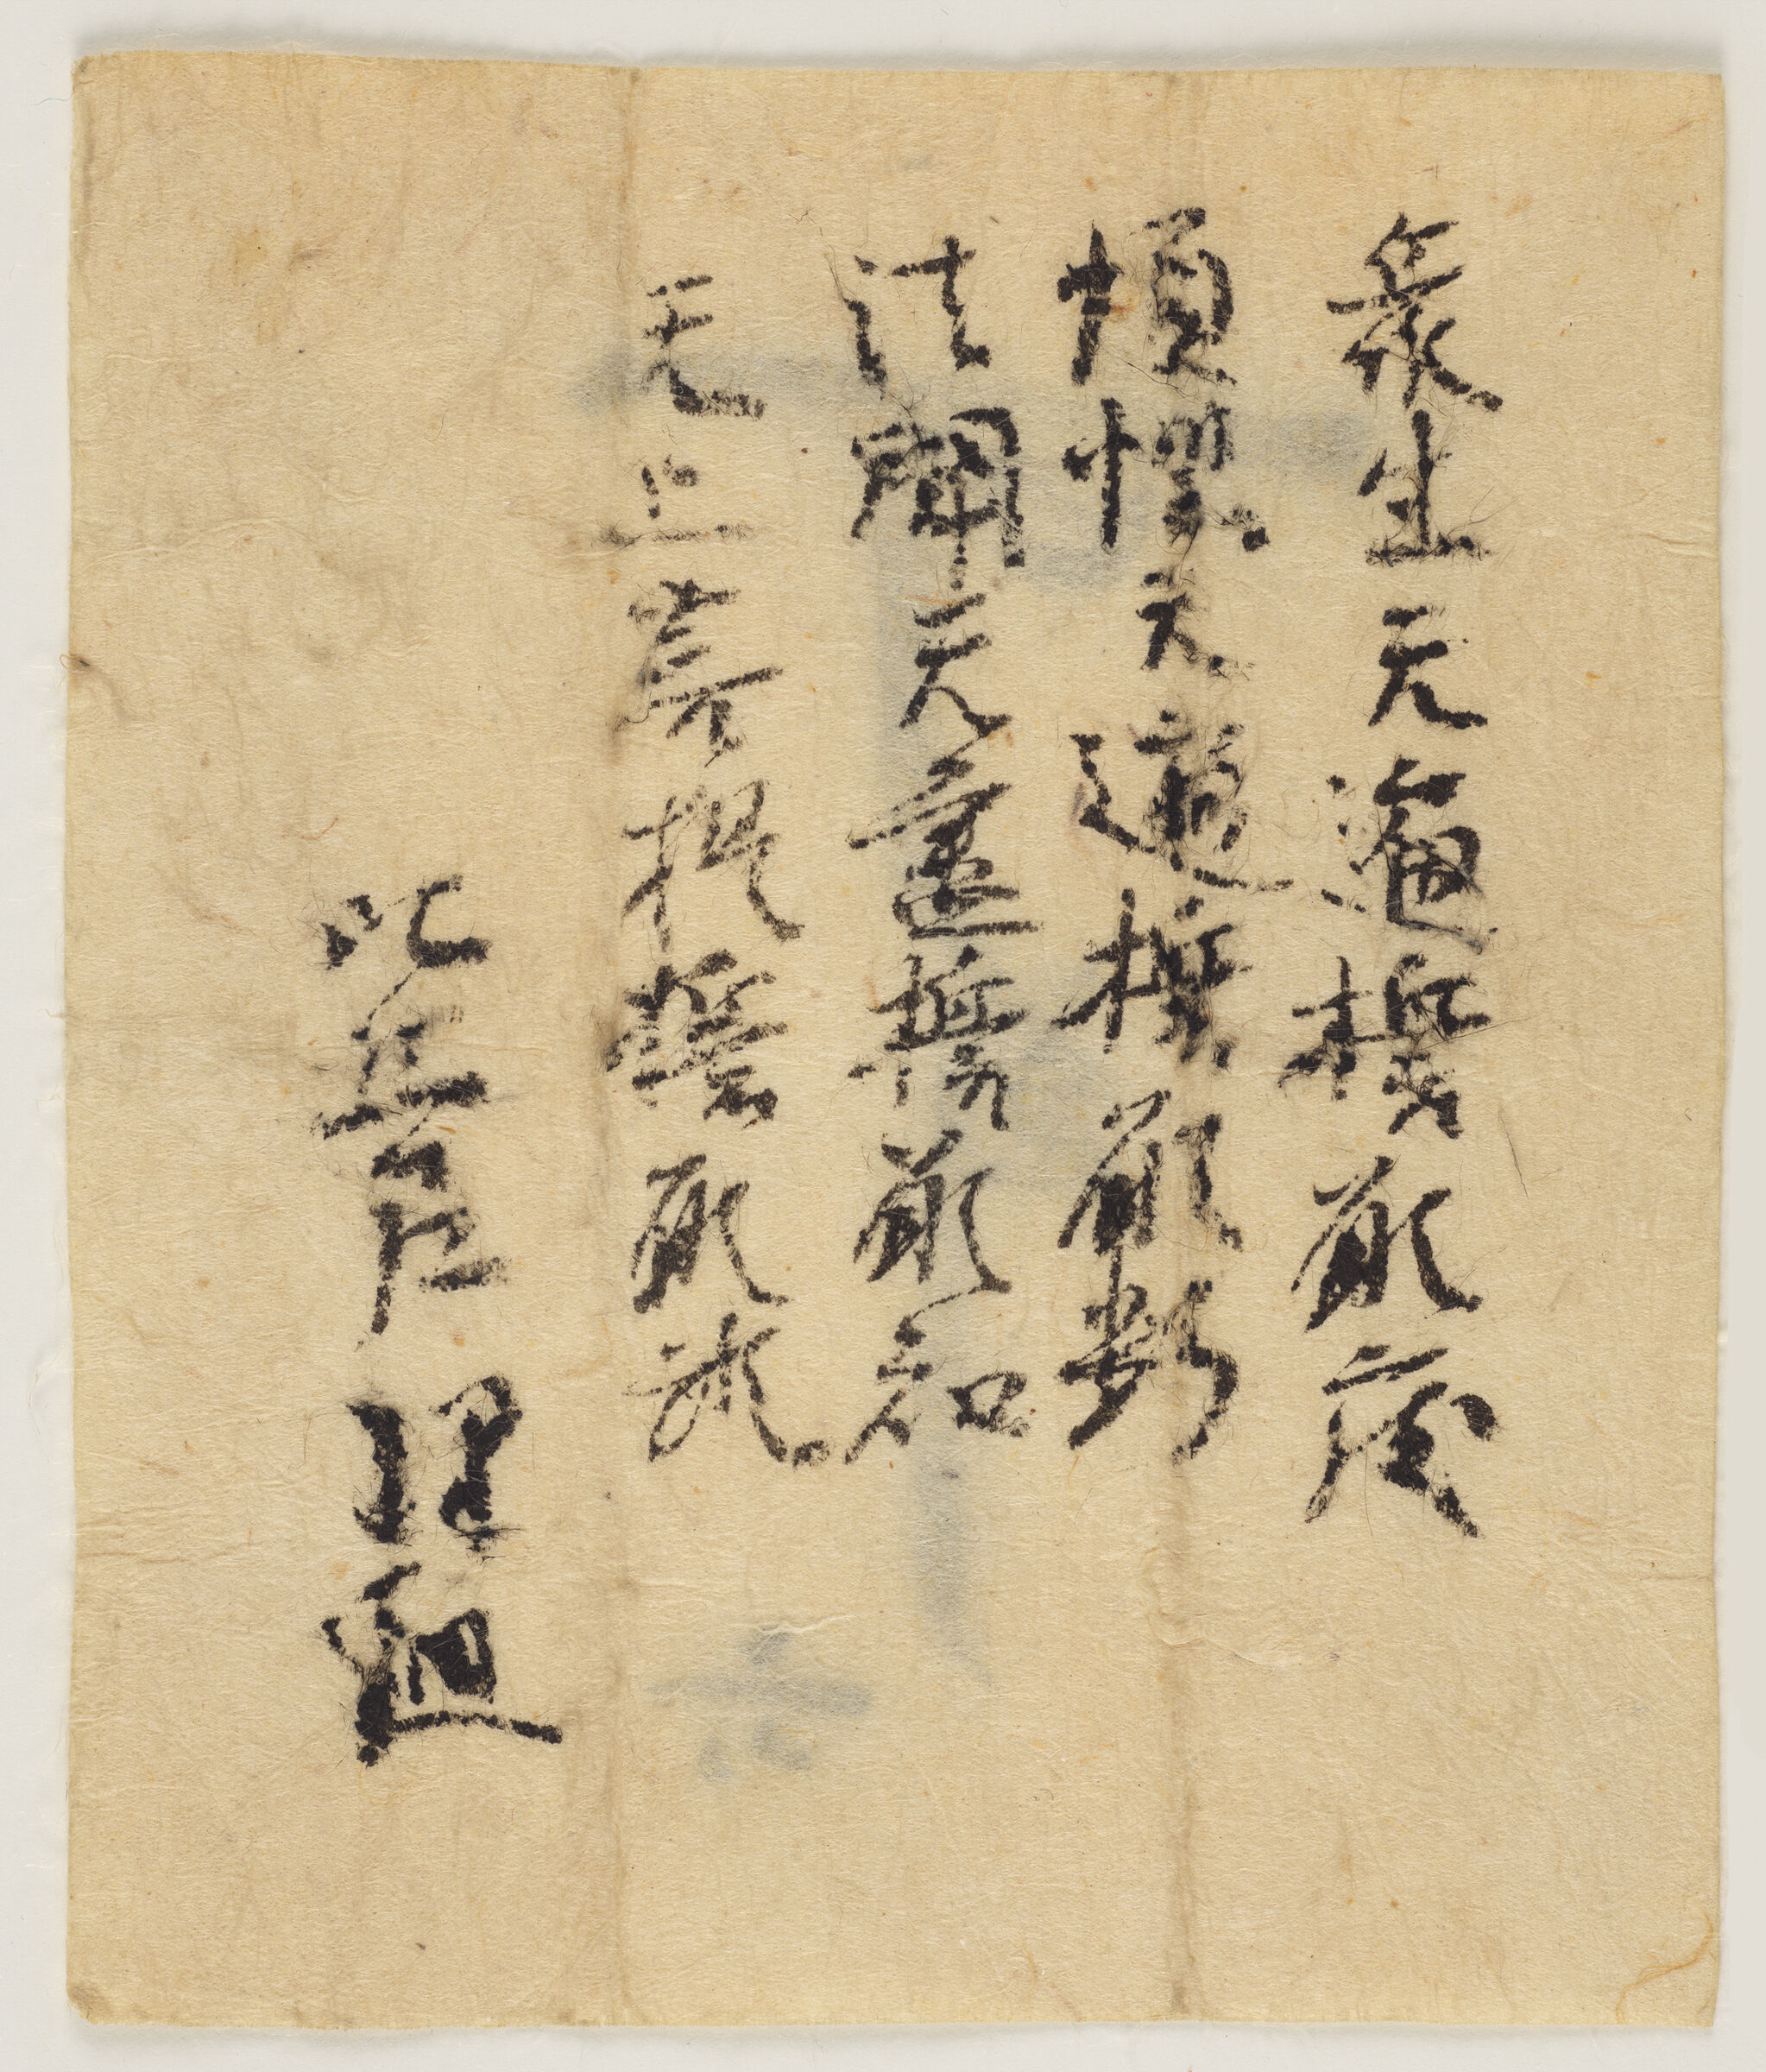 One Of Six Sheets Of Paper (Some Double-Sided) Inscribed With Religious Texts, Poems, Charms